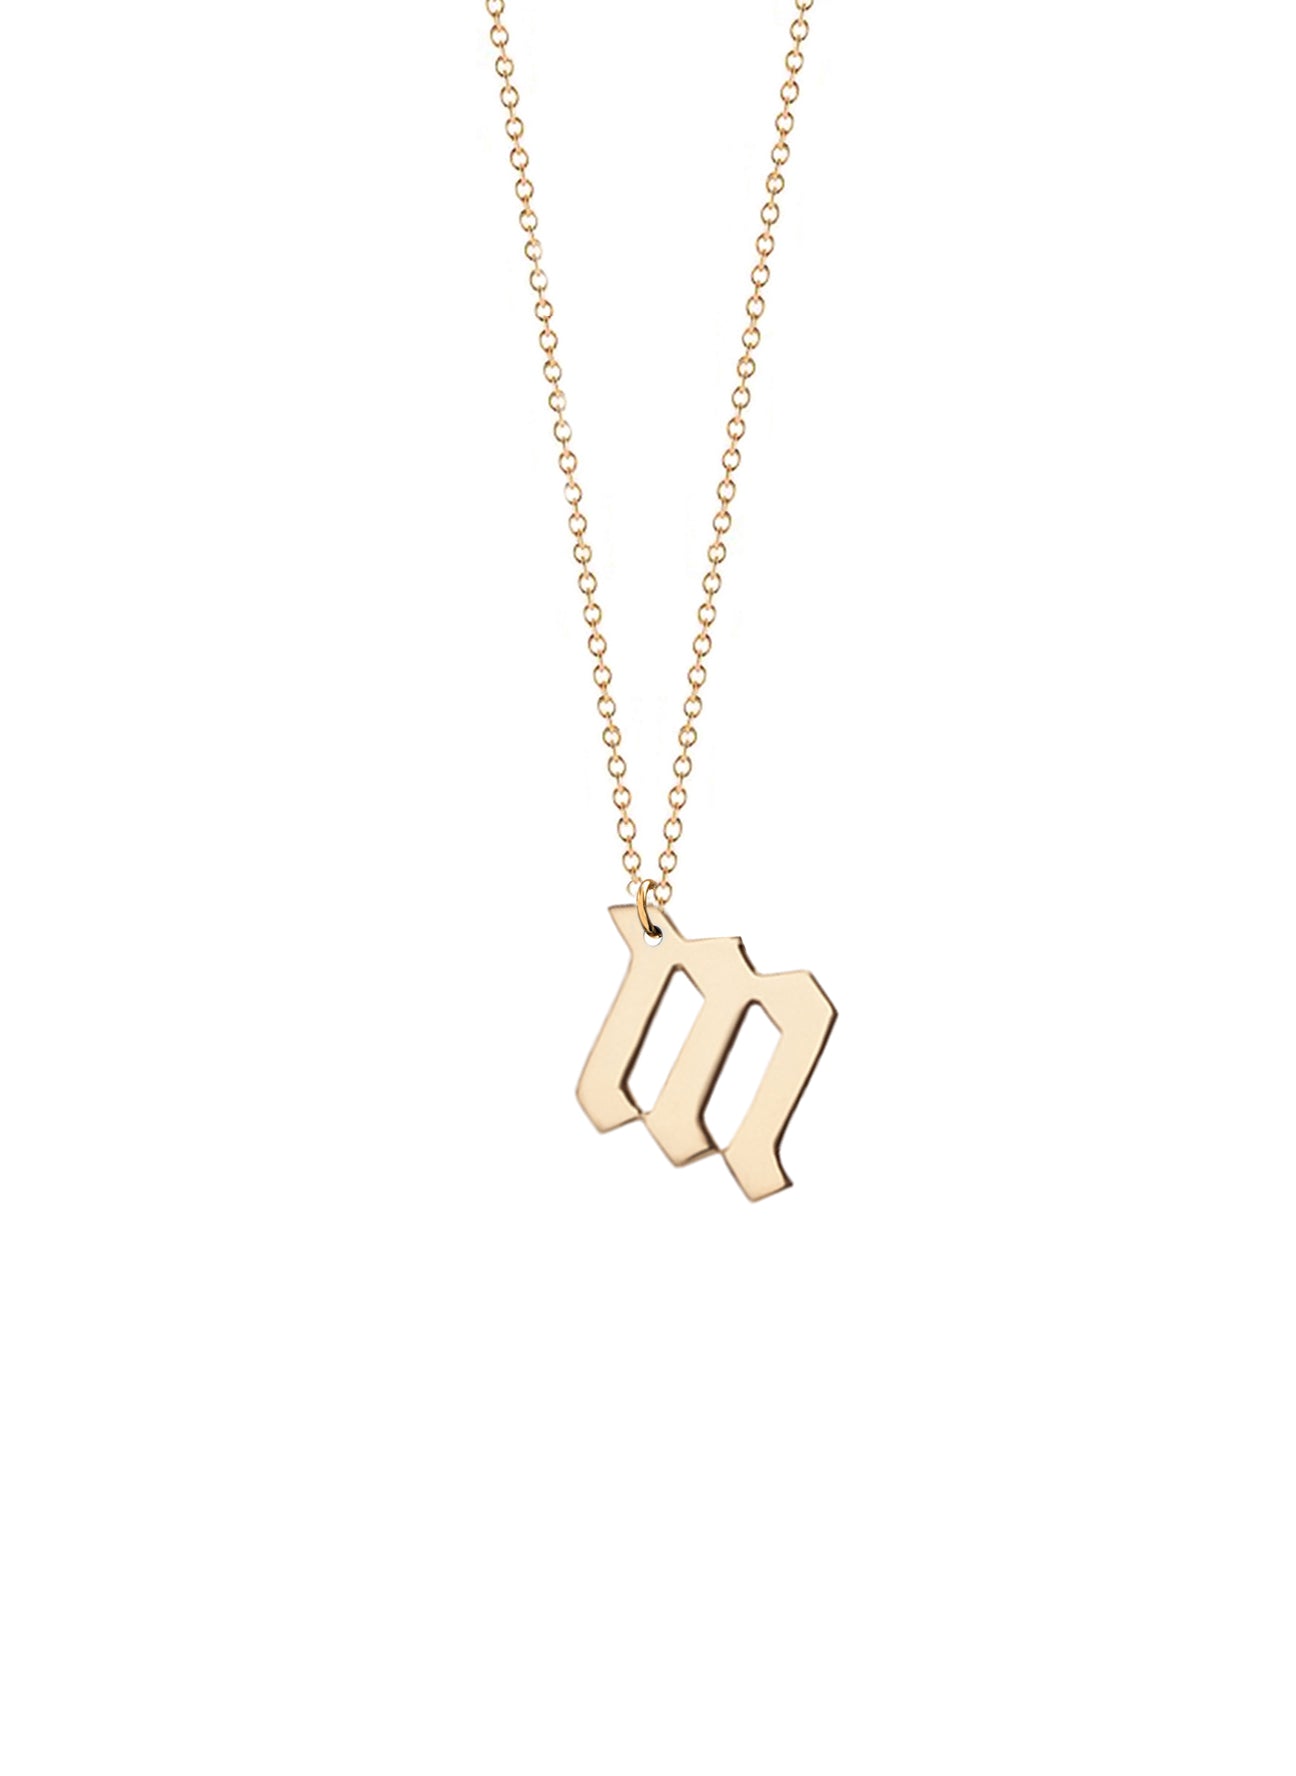 Lower Case Old London Initial Necklace – Miriam Merenfeld Jewelry